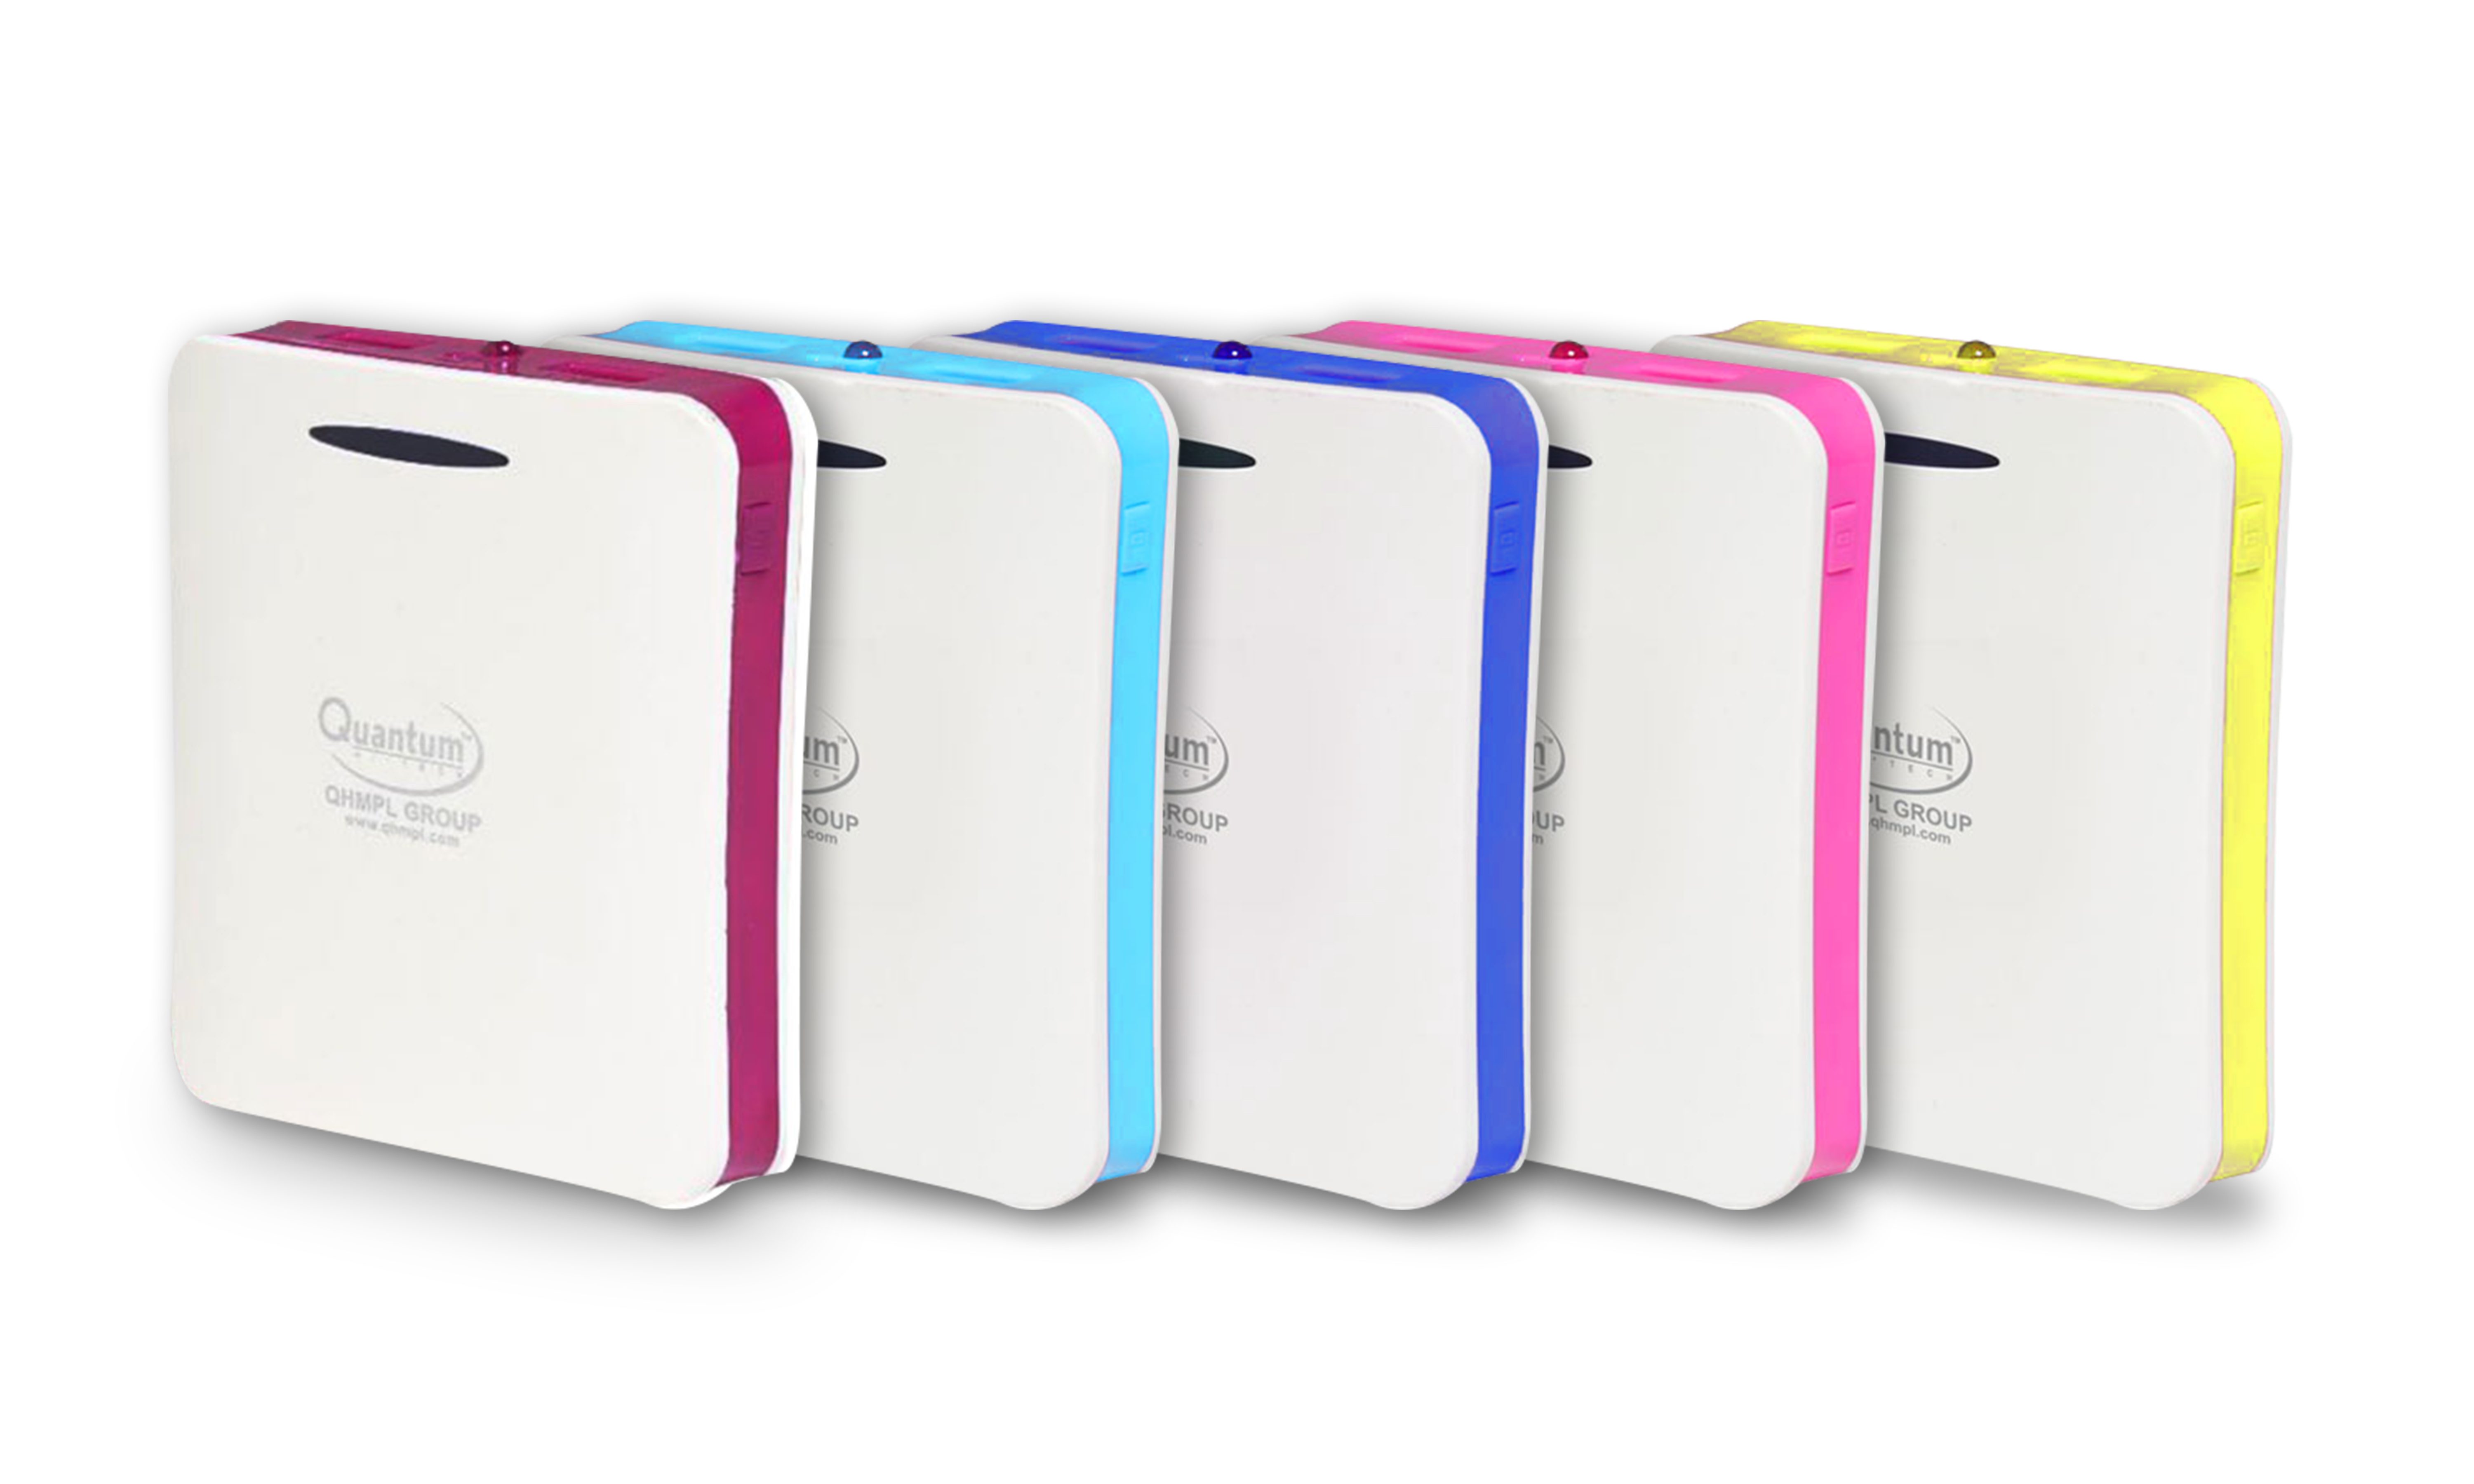 Quantum Hi Tech launches 10400mah Power bank in summer colors, priced at Rs. 1499/-